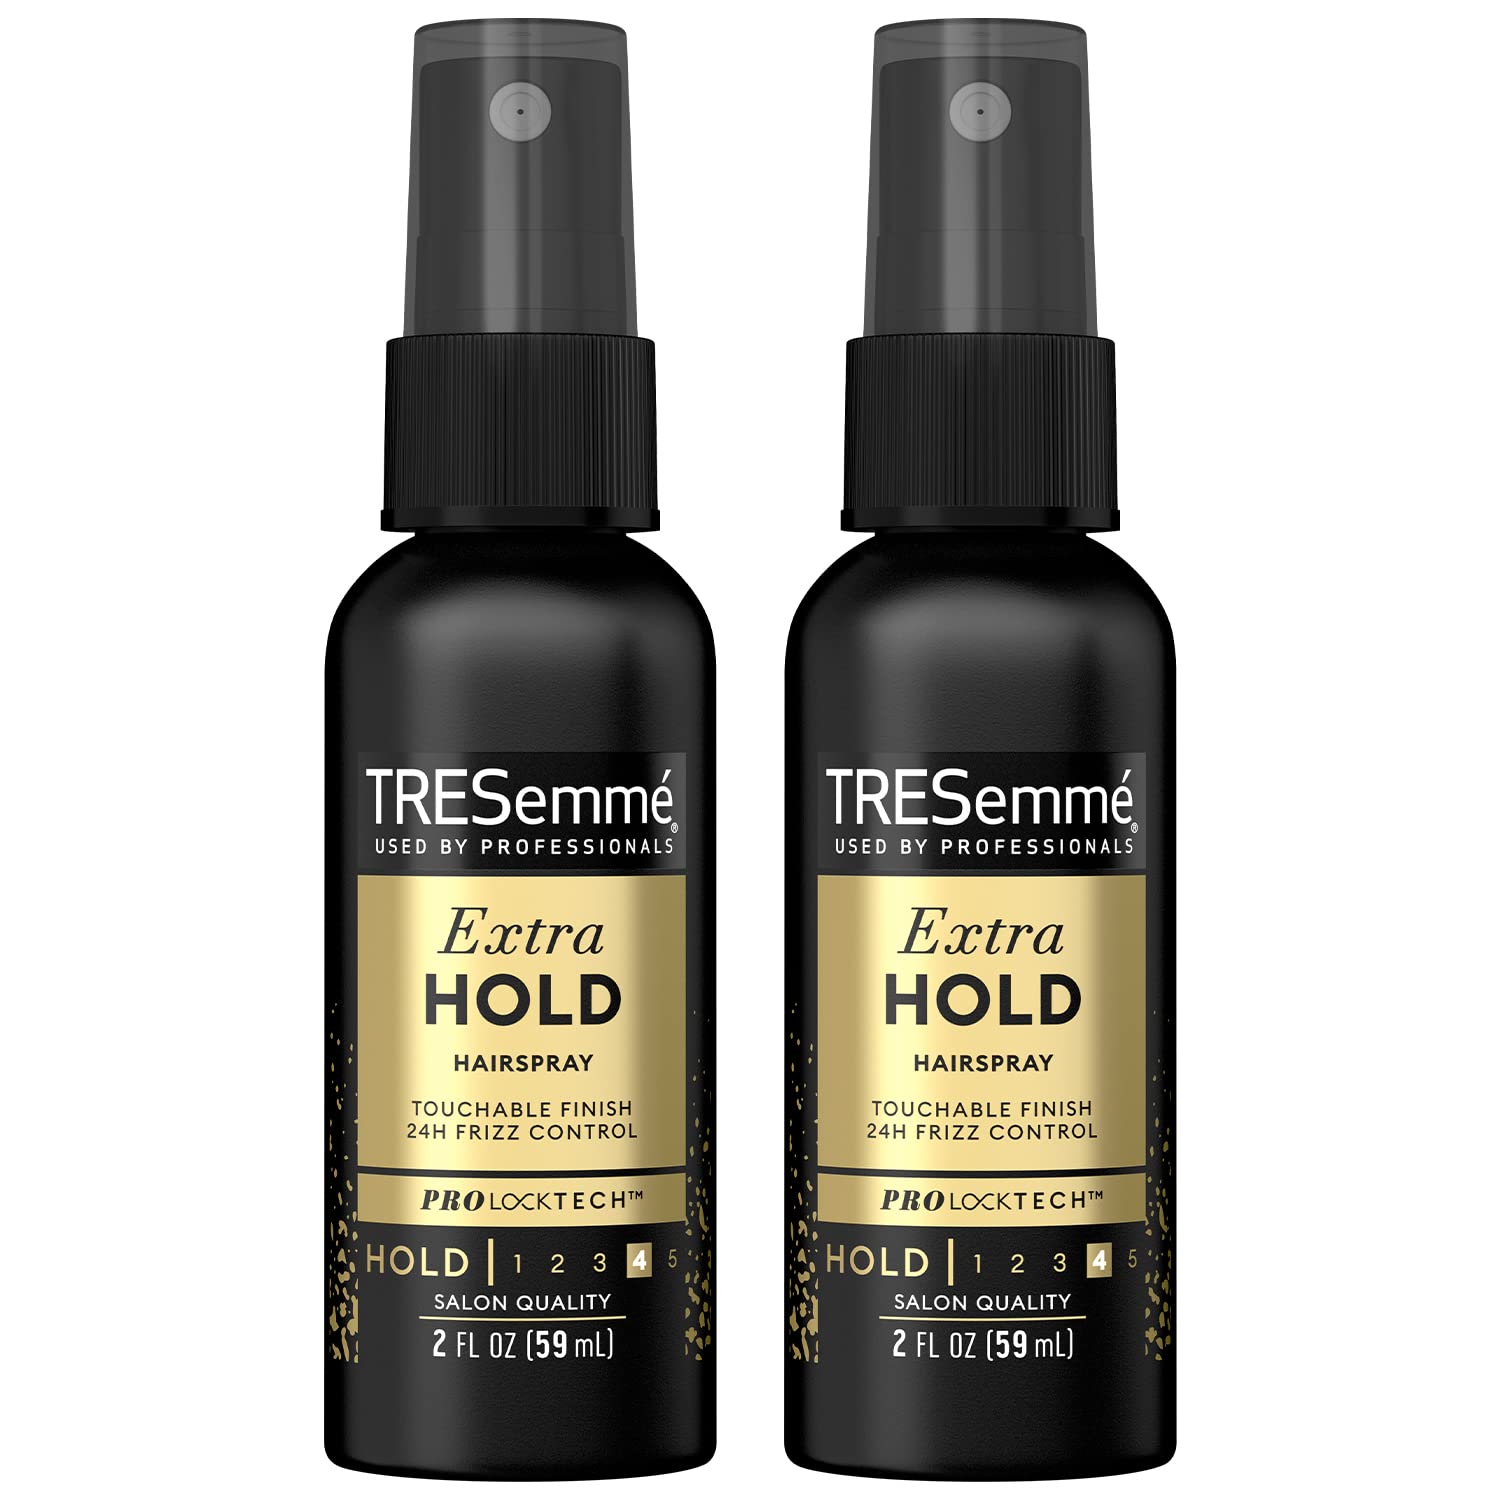 TRESemm Tres Two Spray with Extra Hold Non-Aerosol Hairspray Travel Size  Extra-Firm Control Strong Hold with Touchable Feel Humidity Resistant Frizz  Control 2 pk 2 oz Bottles